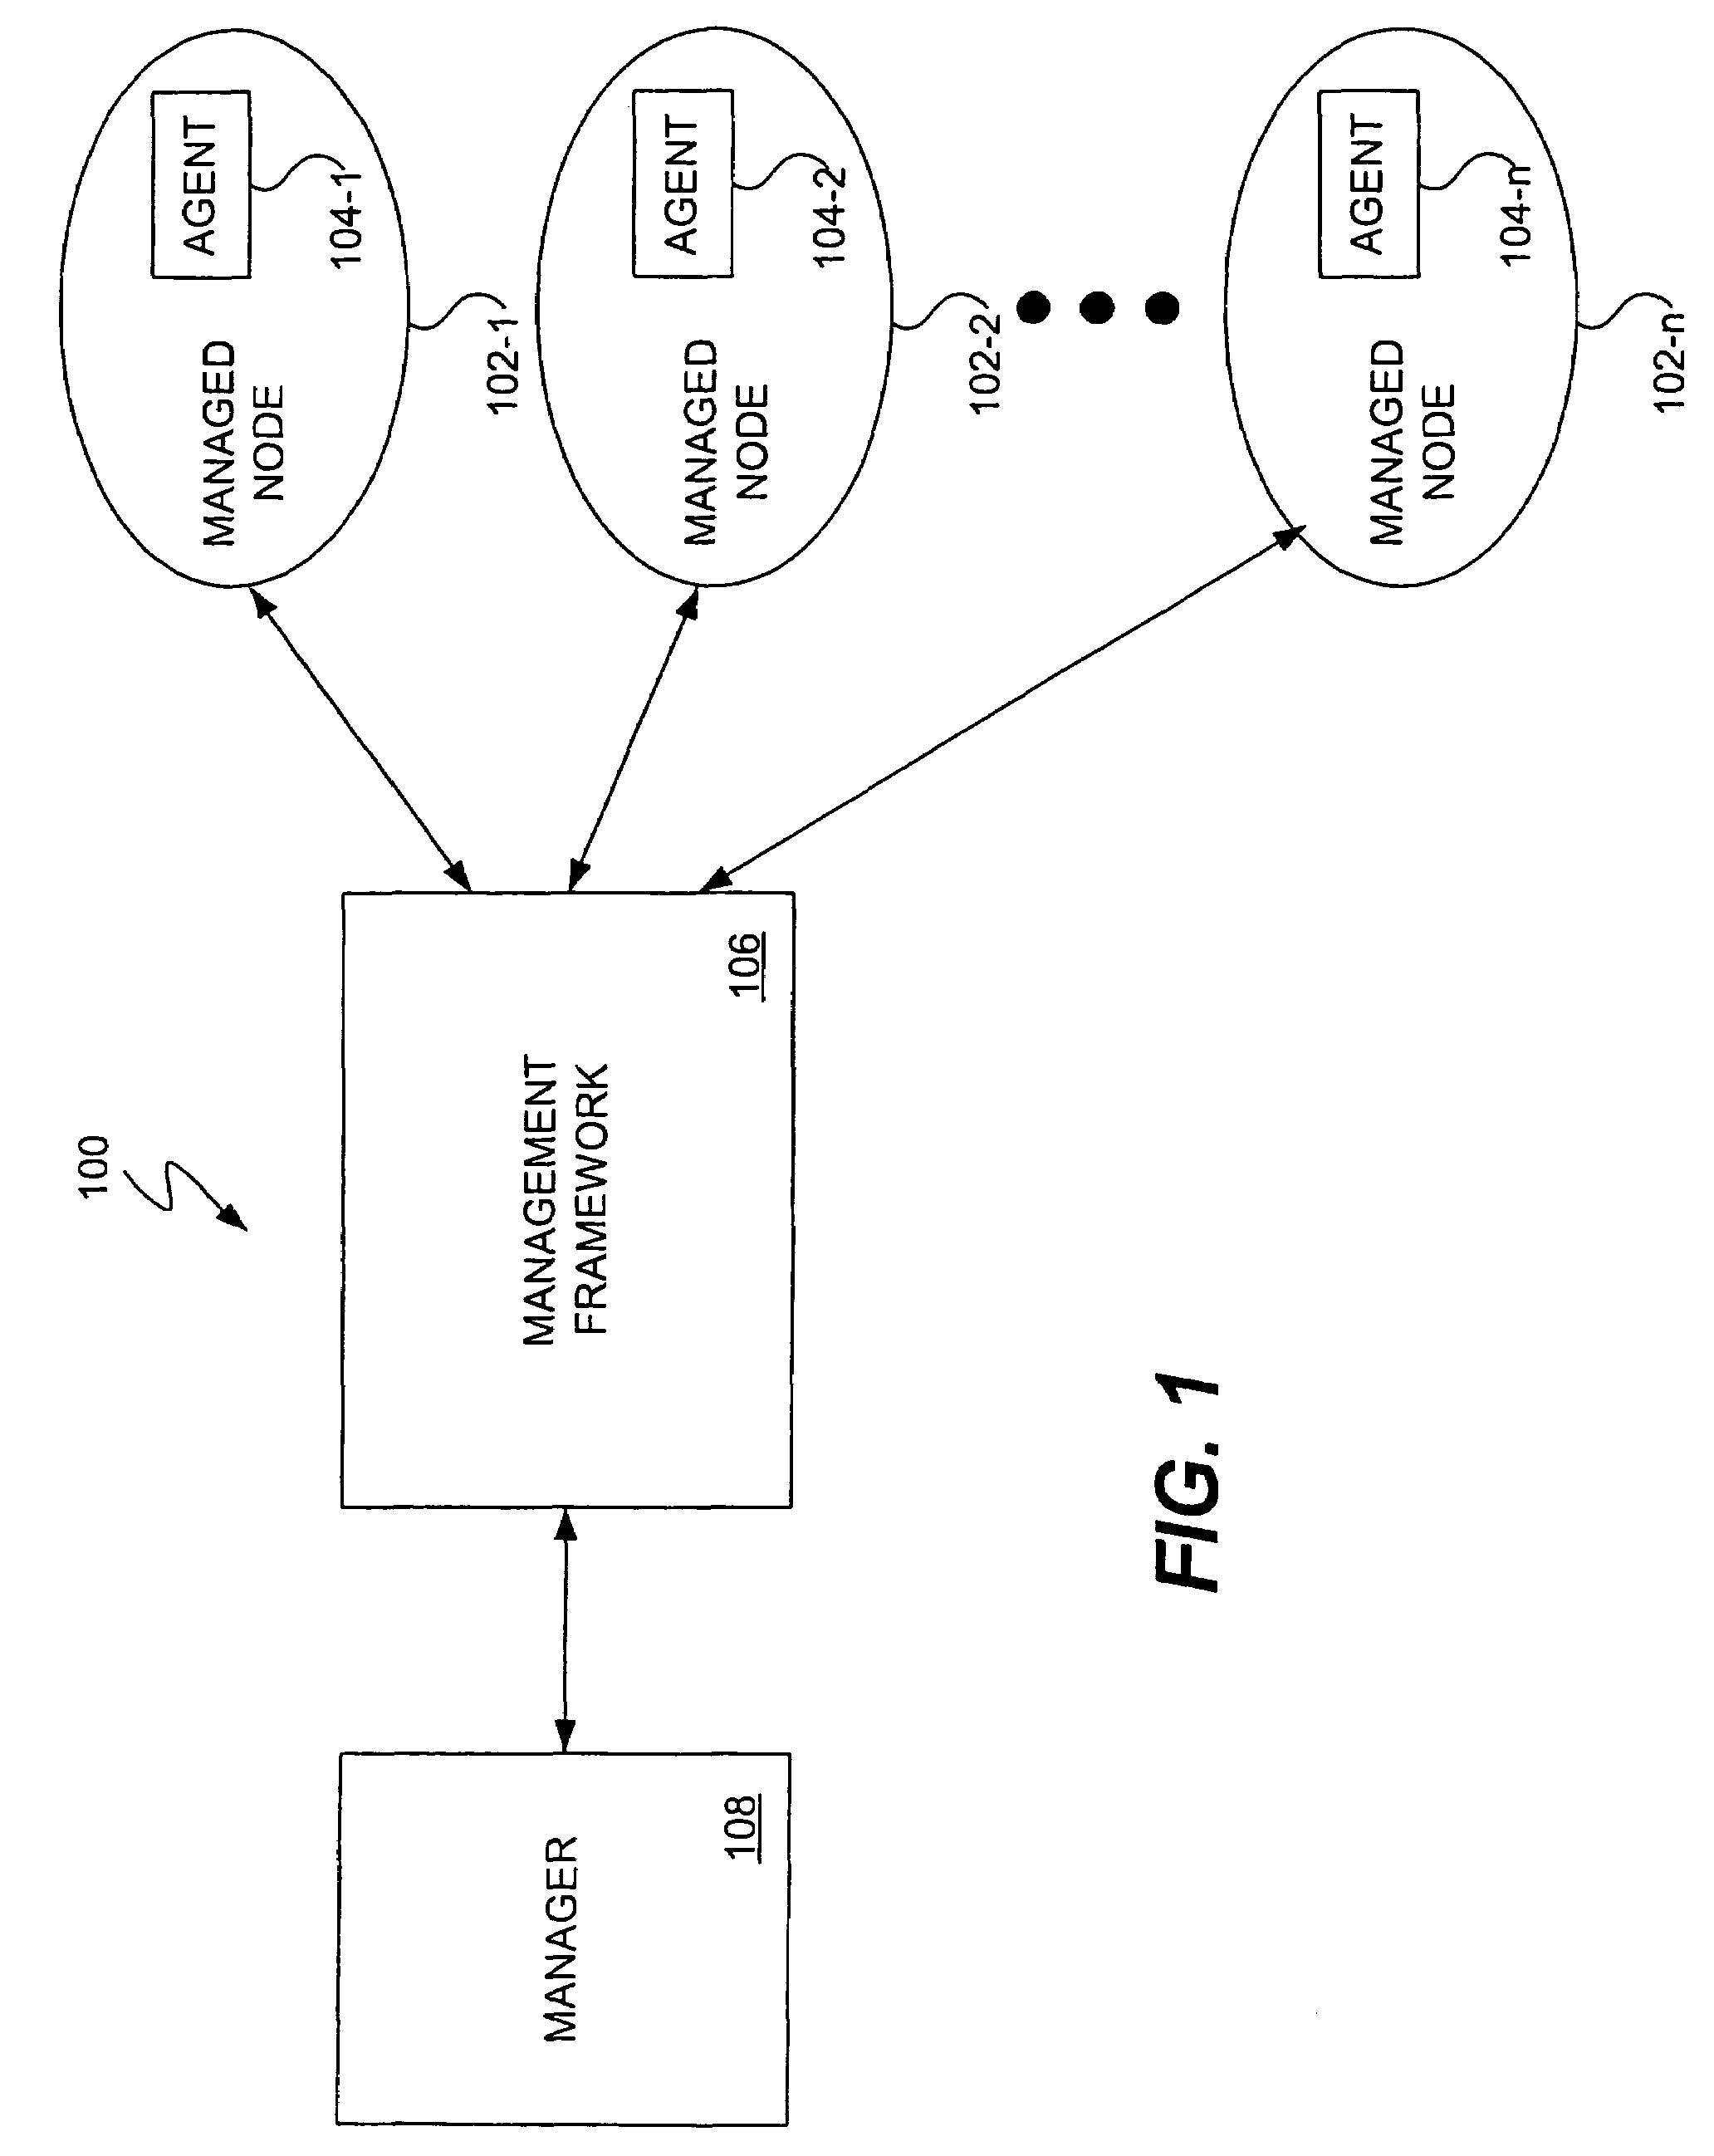 Method and system for managing computer systems